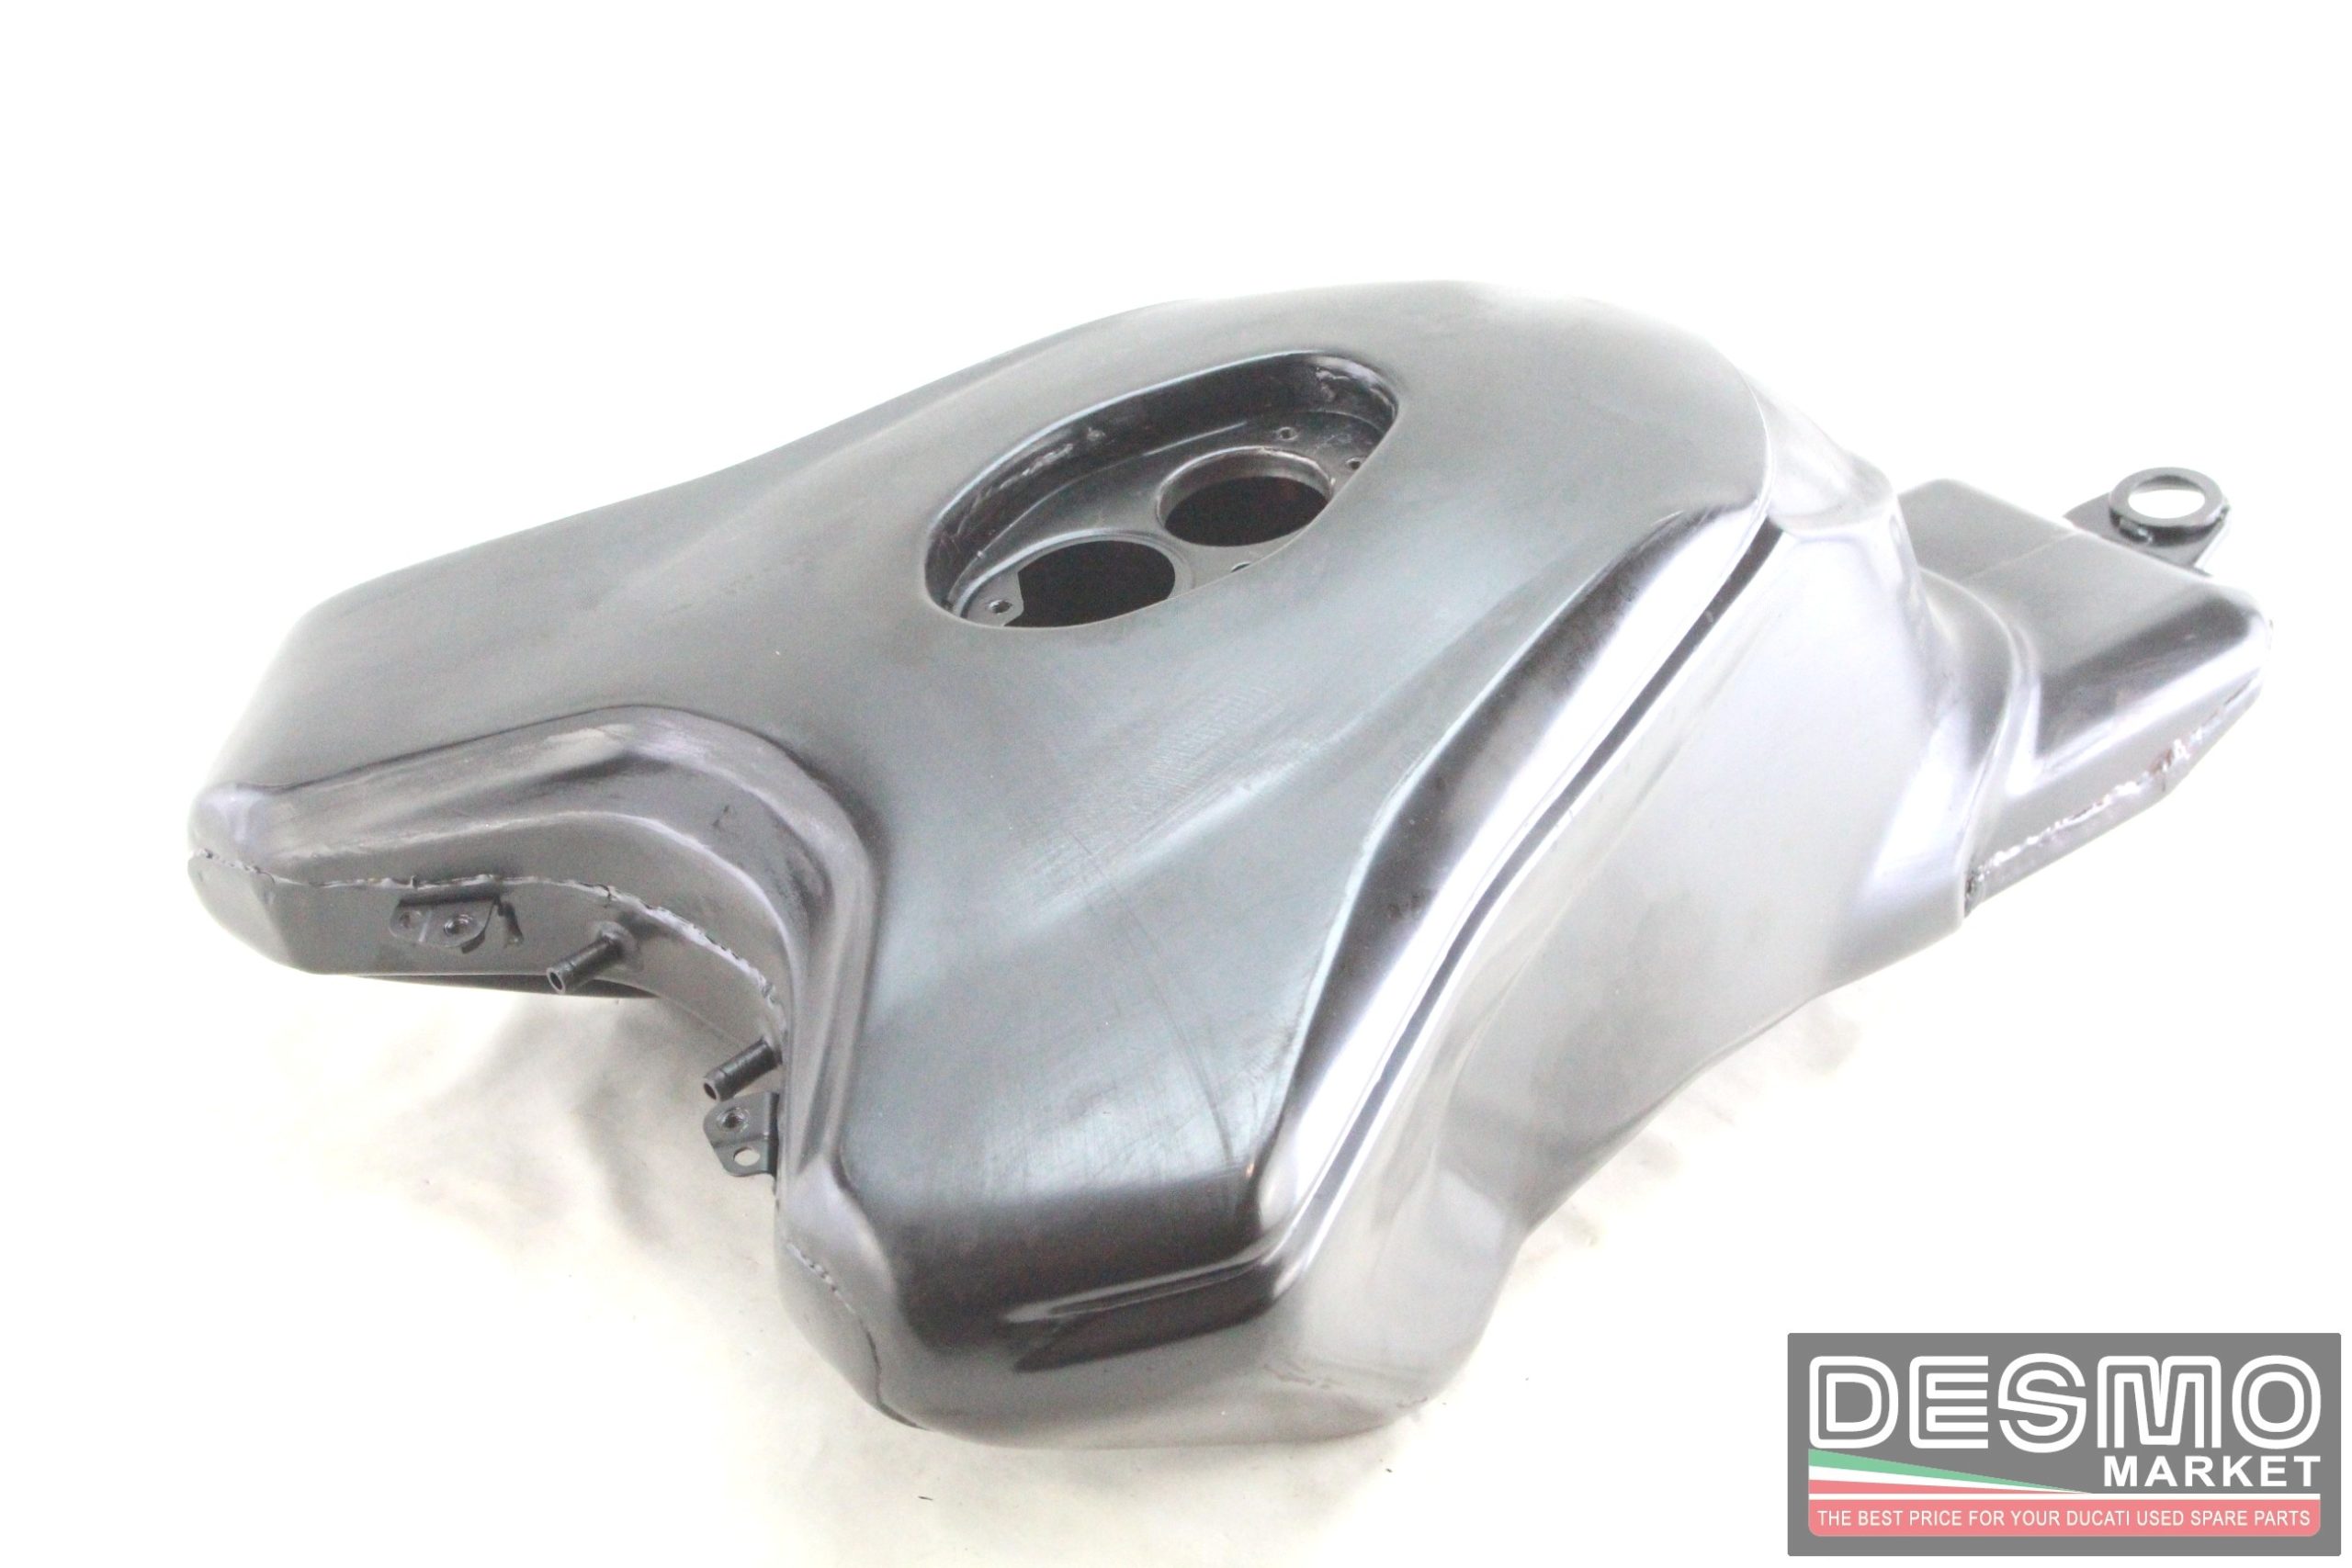 18％OFF】 Gas Tank DUCATI 999 RSファクトリーレーシング燃料タンク Ducati Corse 真新しい RS Factory  Racing Fuel Tank, Corse, BRAND NEW